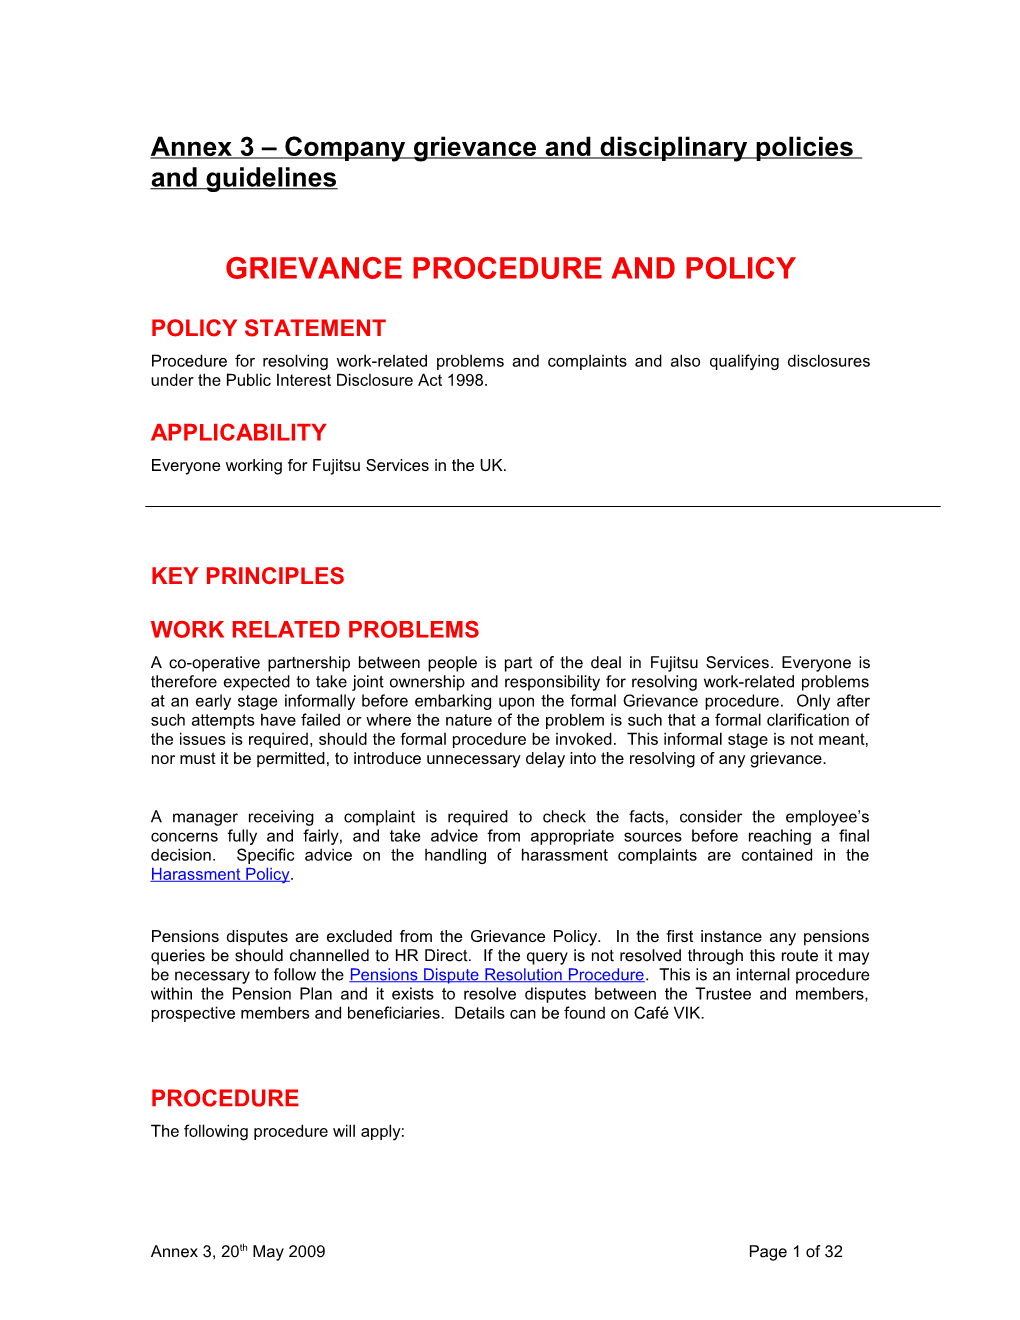 Annex 3 Company Grievance and Disciplinary Policies and Guidelines